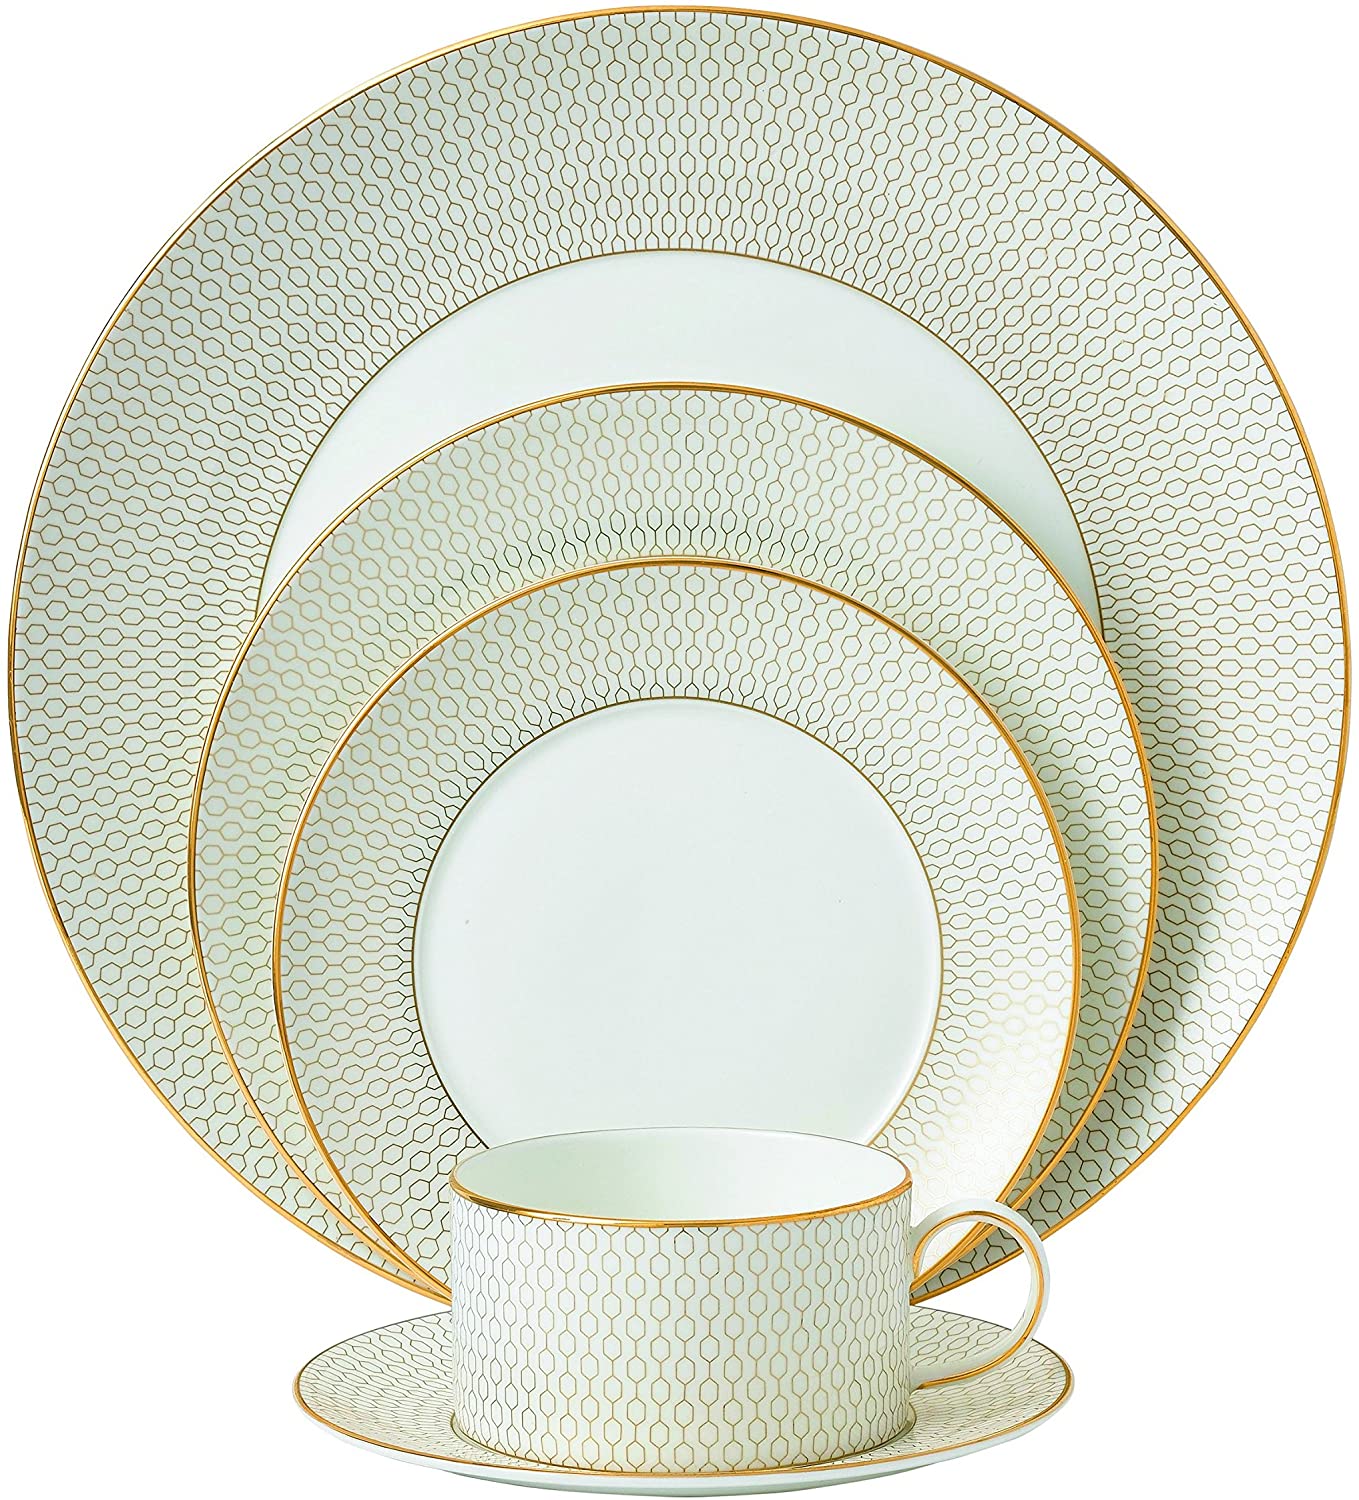 Gio Gold 5 piece place setting